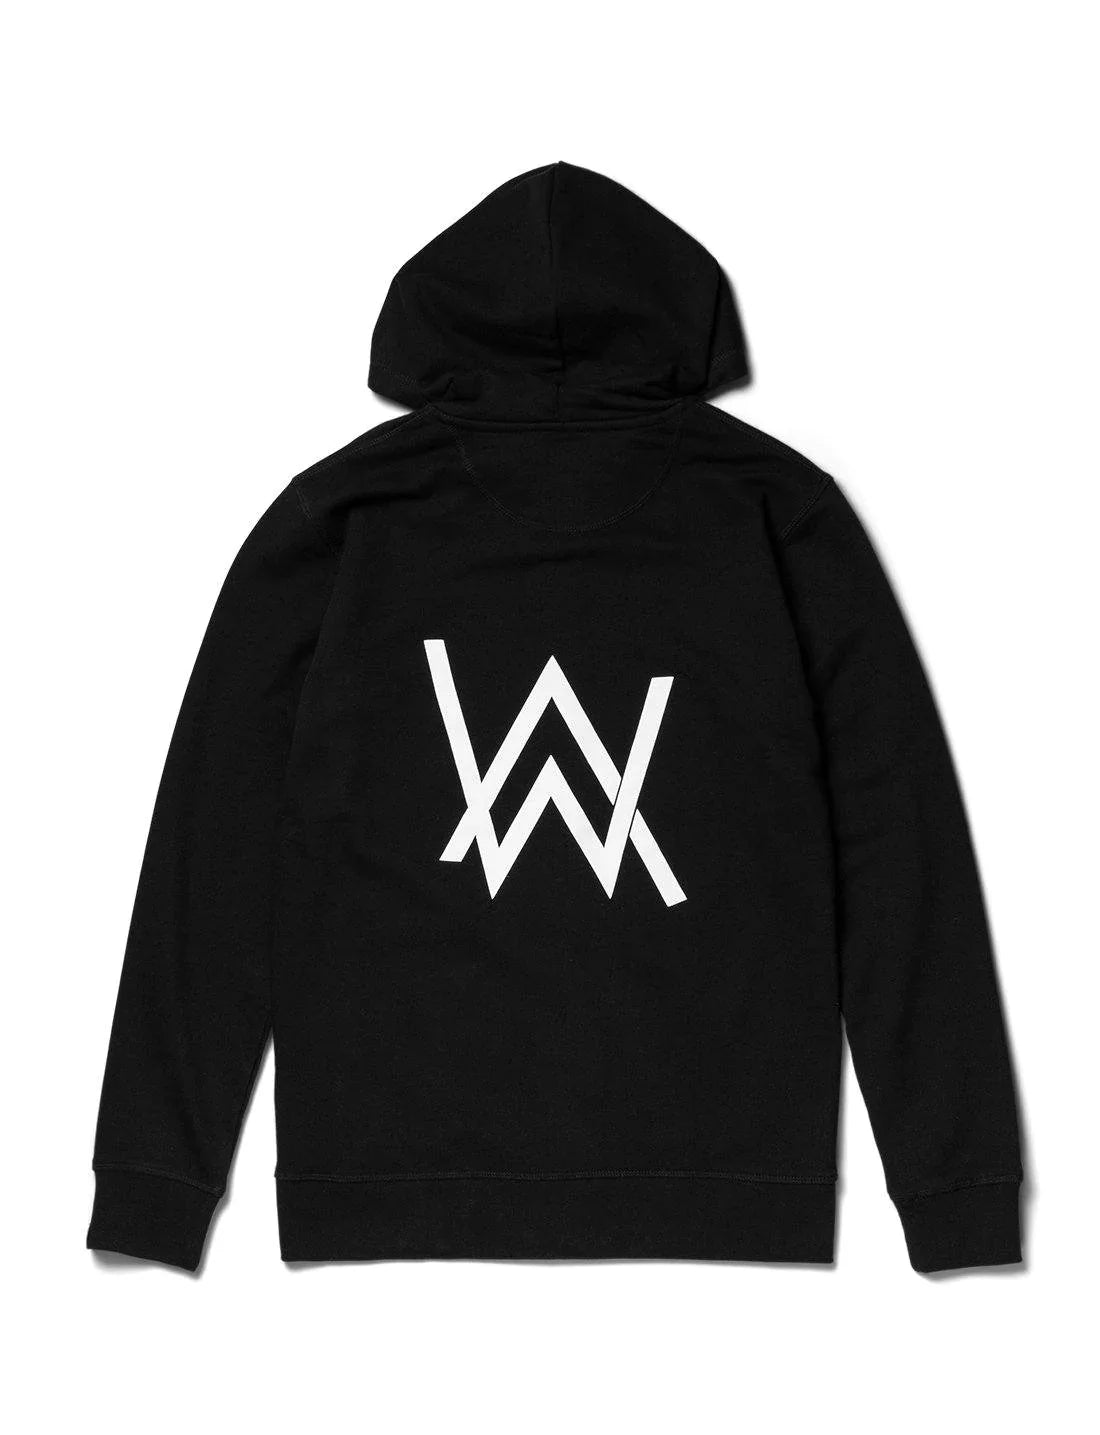 Rear view of the CORE LOGO ZIP HOODIE in black, featuring the iconic 'AW' white logo on the back, with a roomy hood and ribbed hem, exuding urban style and comfort, displayed on a white background.